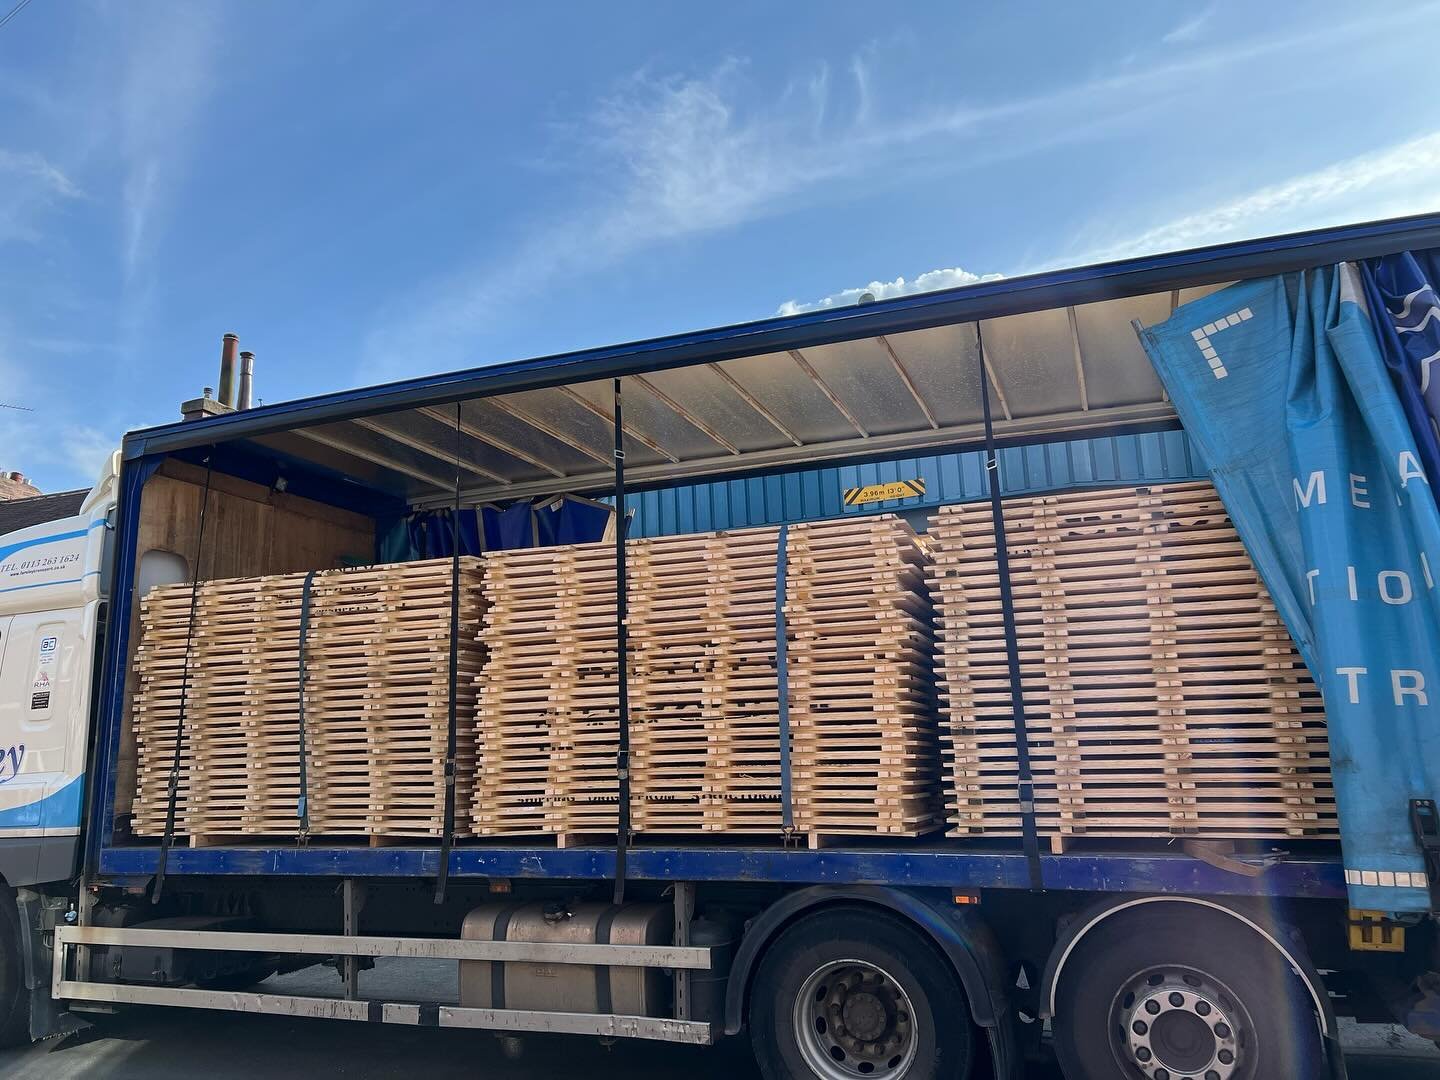 Last week a customer came to us with just a weeks notice to say they&rsquo;d like an interlocking floor system for their 20m x 50m structure. Safe to say we rose to the challenge and within a week manufactured 650+ 8&rsquo; x 2&rsquo; boards.
Now it&